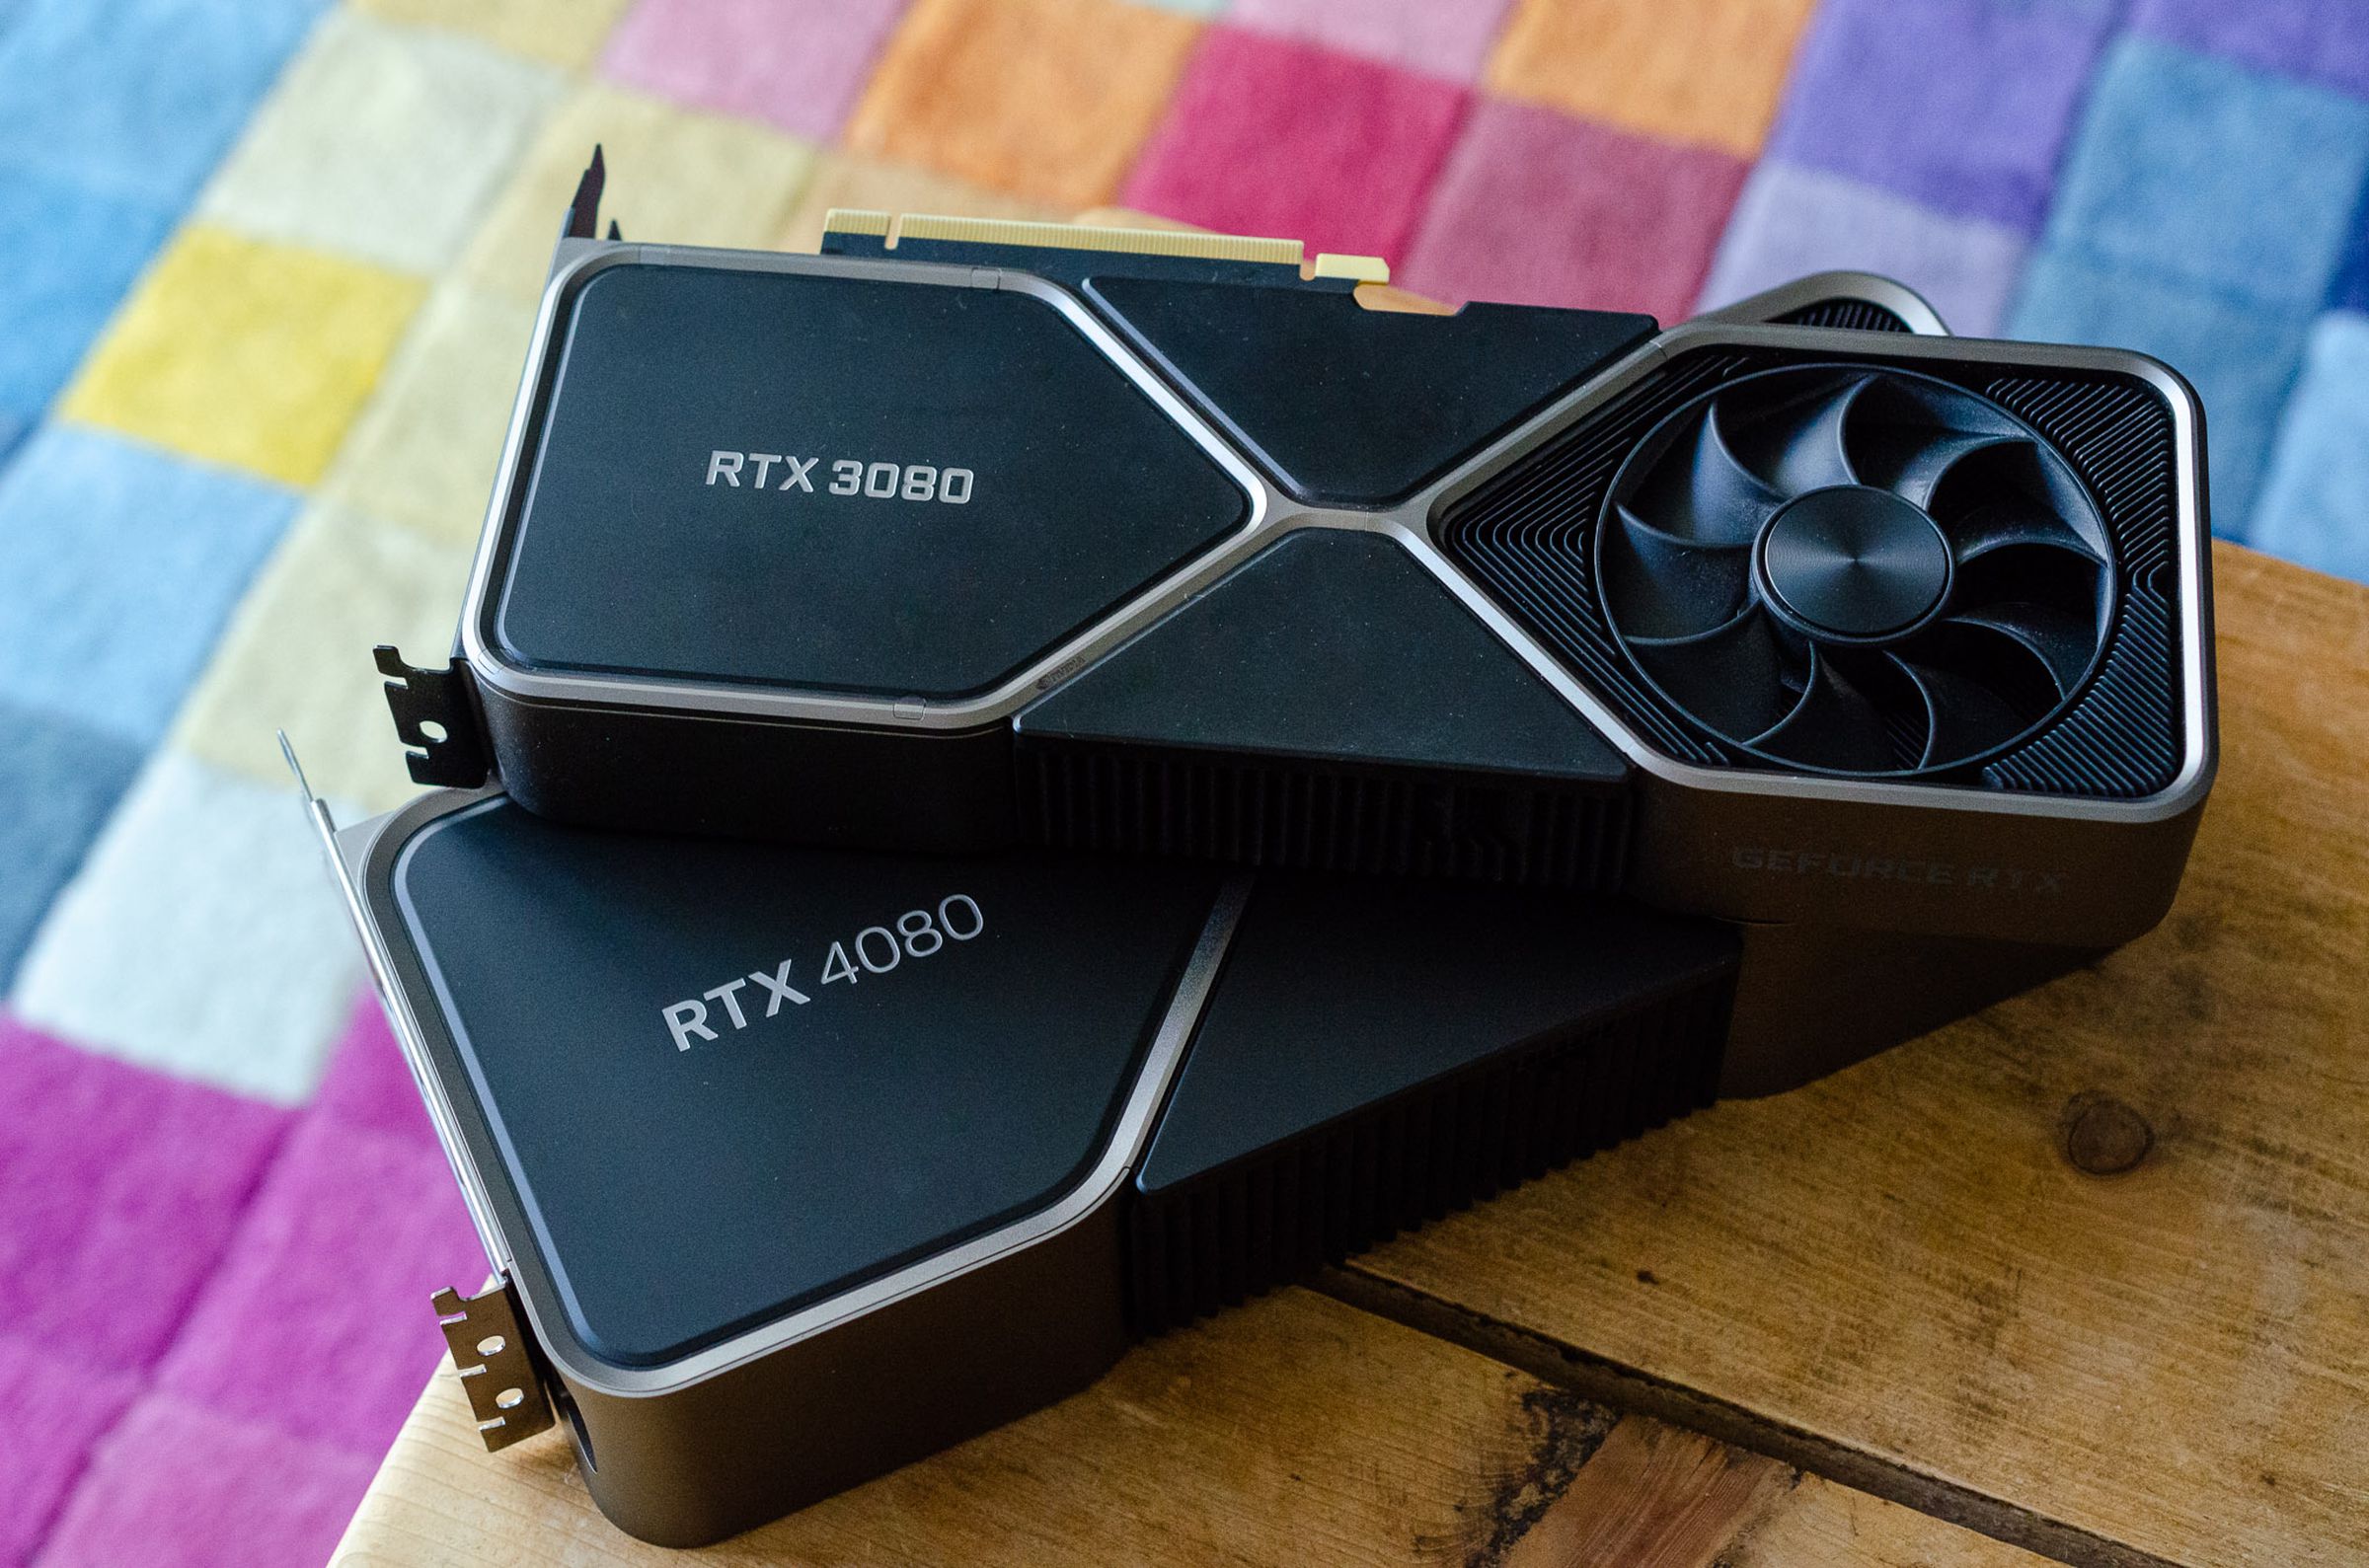 The RTX 4080 easily beats the RTX 3080 it replaces.